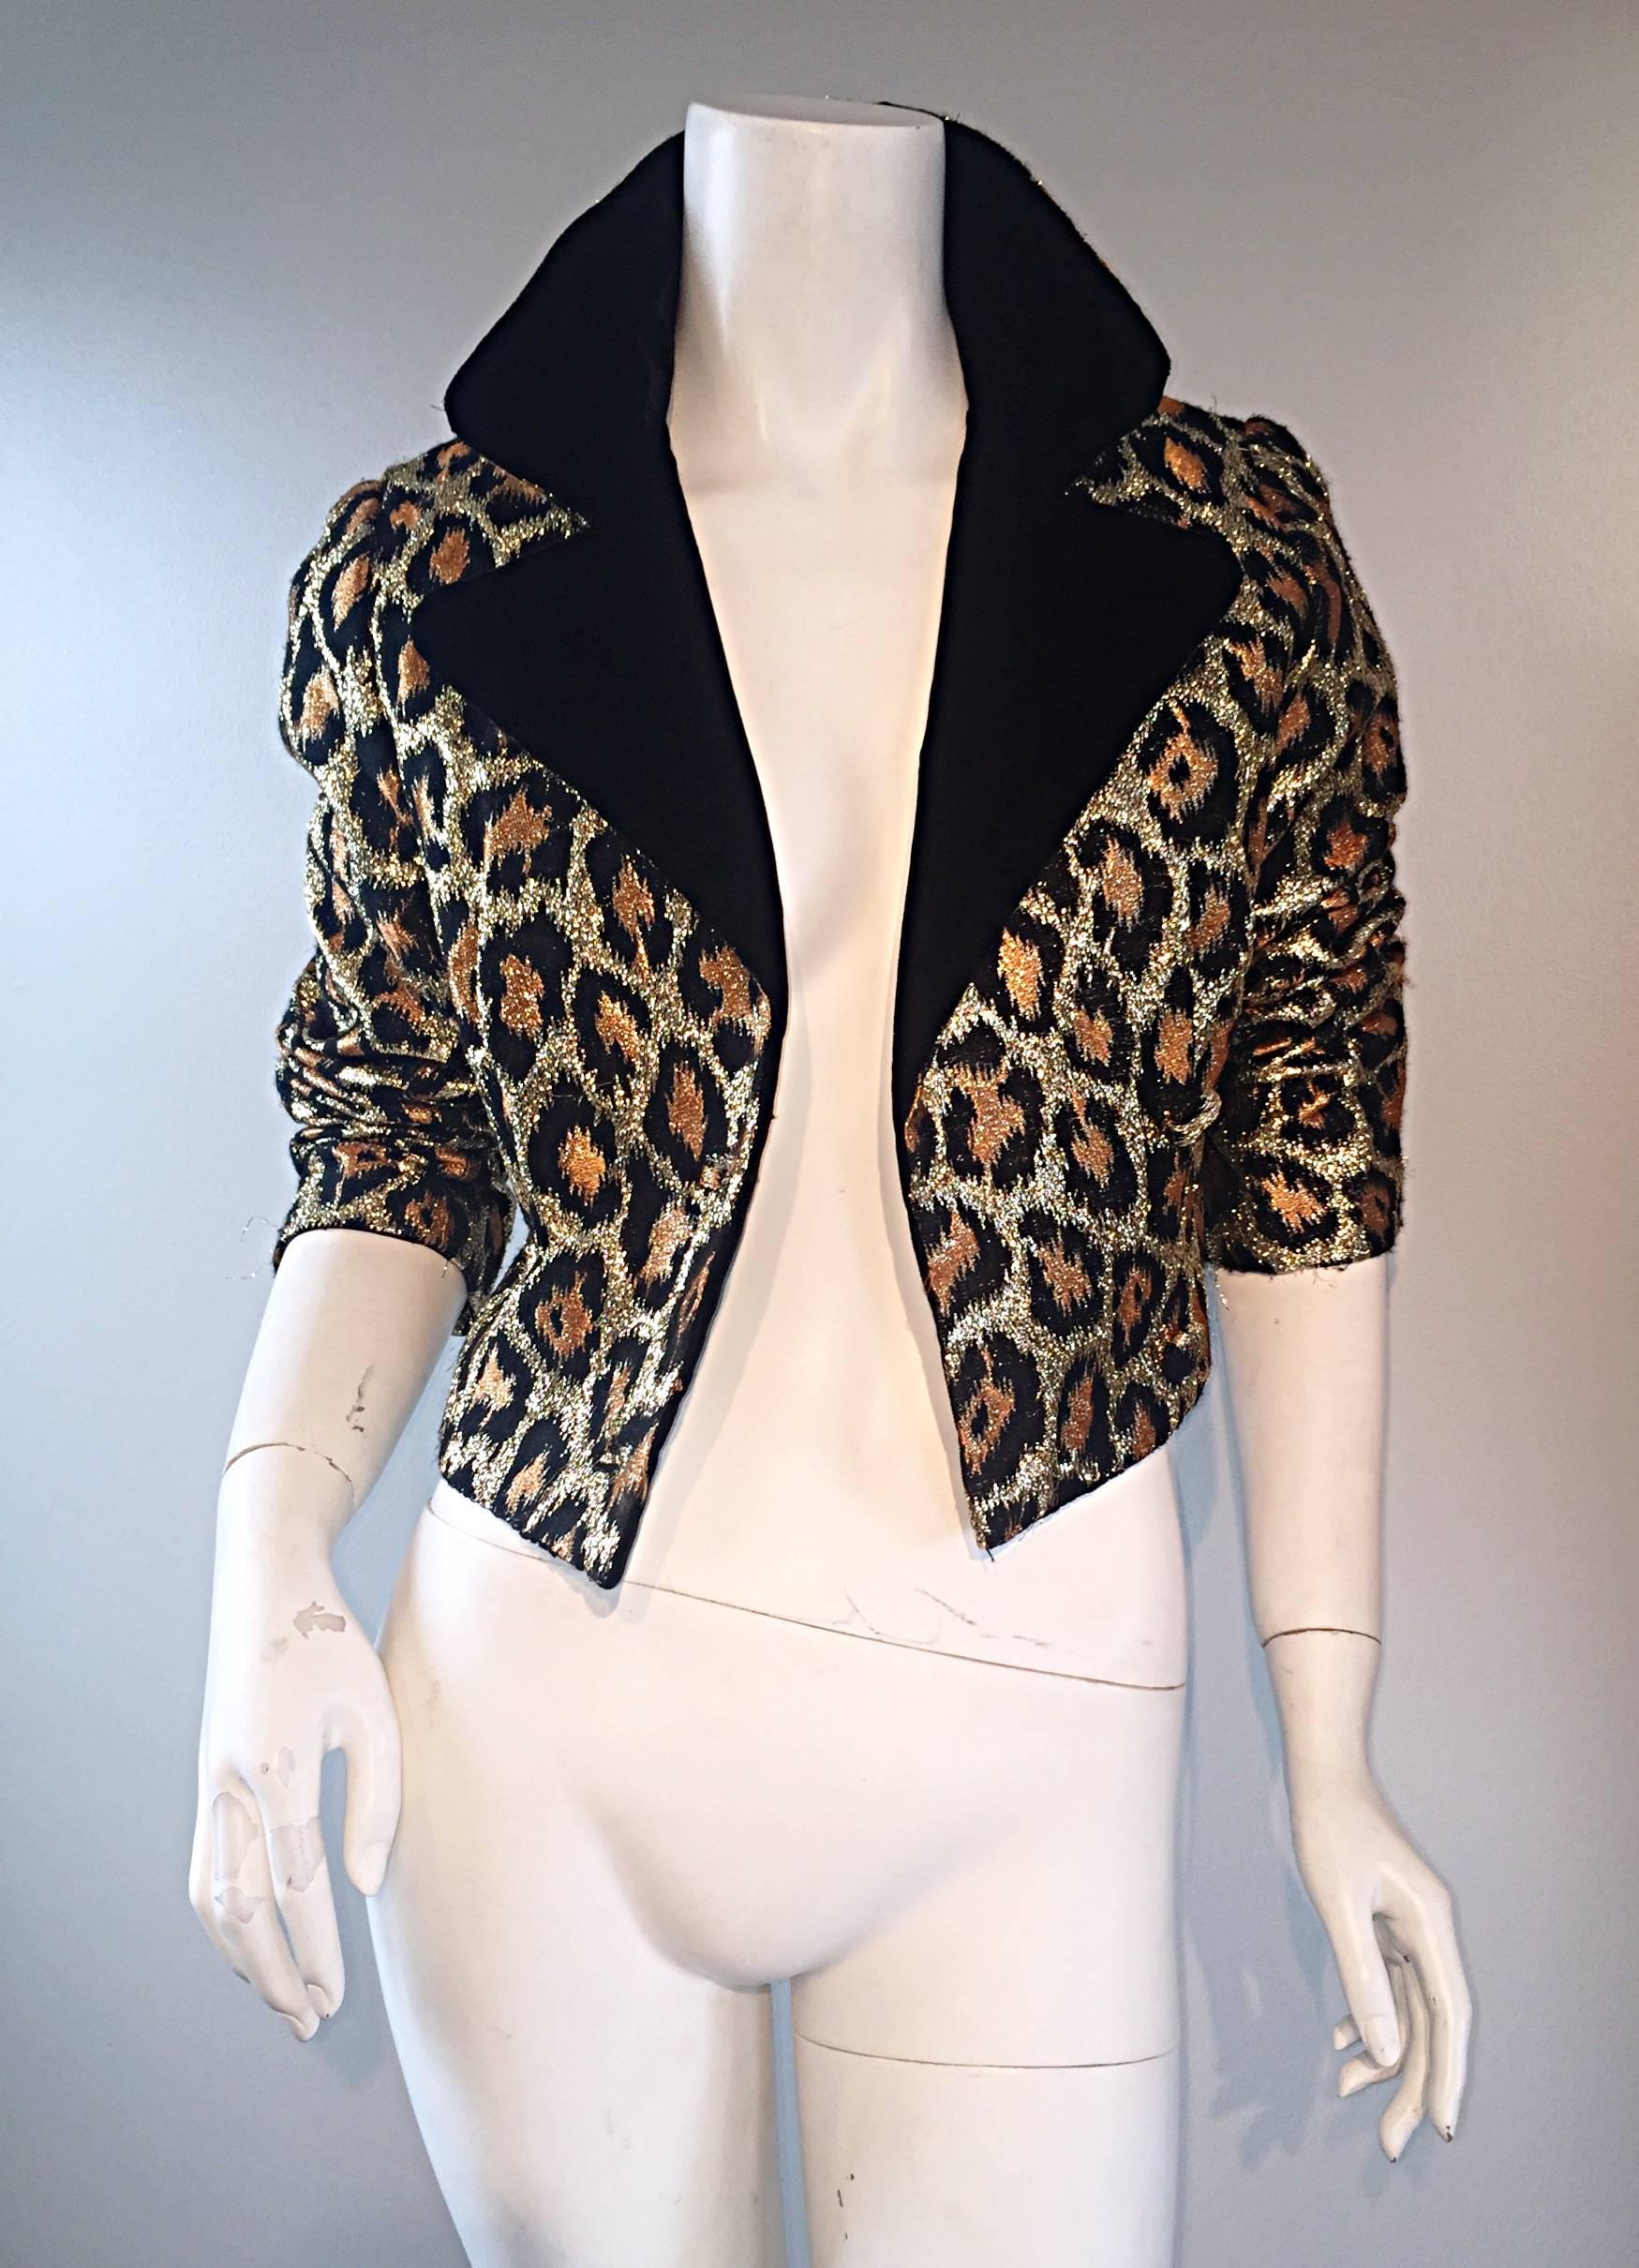 Incredible early 1960s double breasted cropped metallic leopard jacket! Features a chic animal print in gold, bronze, and black. Black velvet lapels and collar. Fully lined. Leopard print is always in style, and this is the perfect amount to 'jazz'